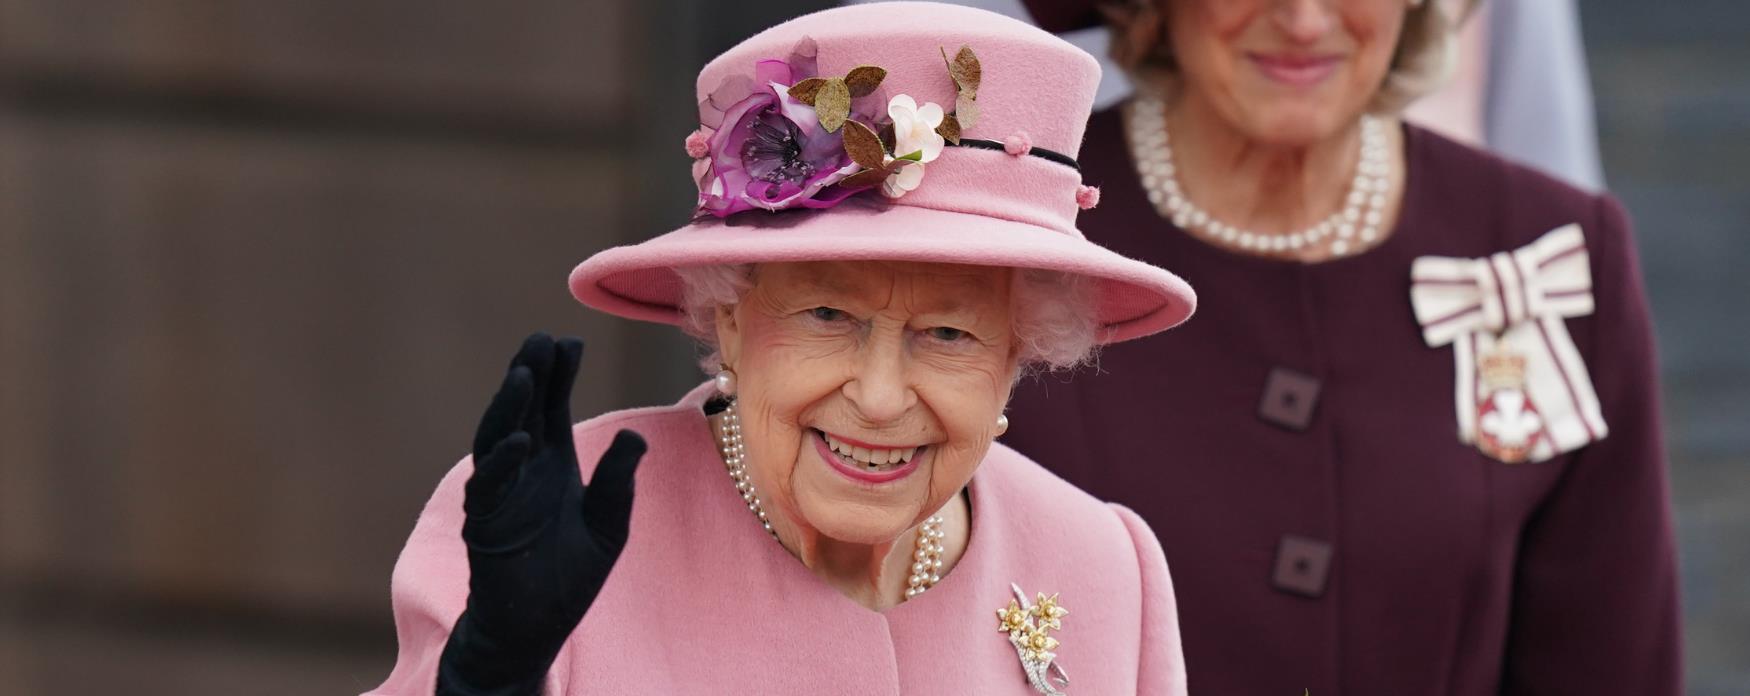 Picture of Queen Elizabeth II wearing a pink hat with flowers on and smiling happily